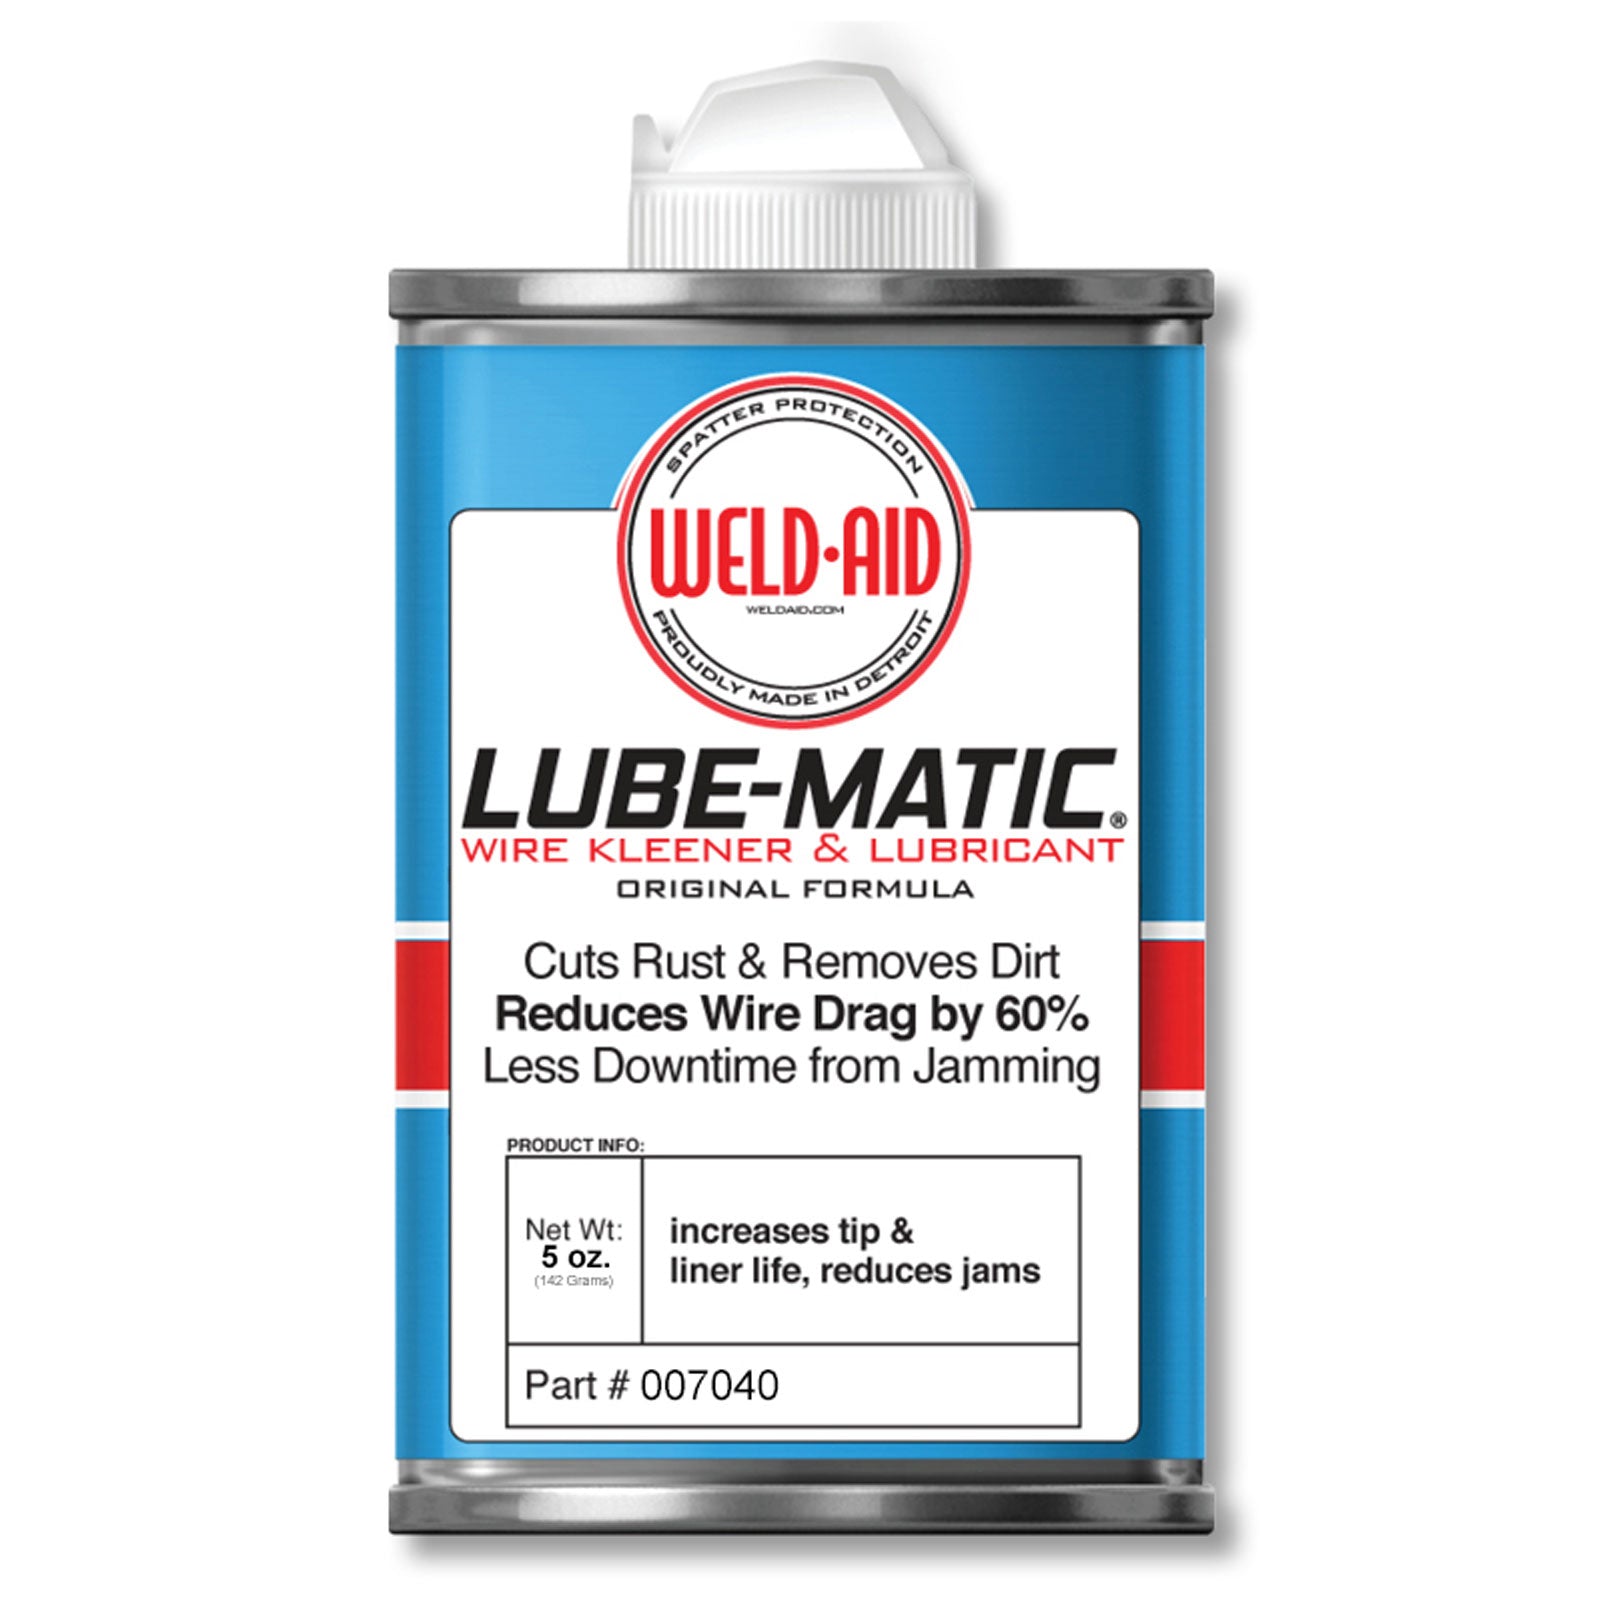 Weld-Aid Lube-Matic Wire Kleener & Lubricant 5oz